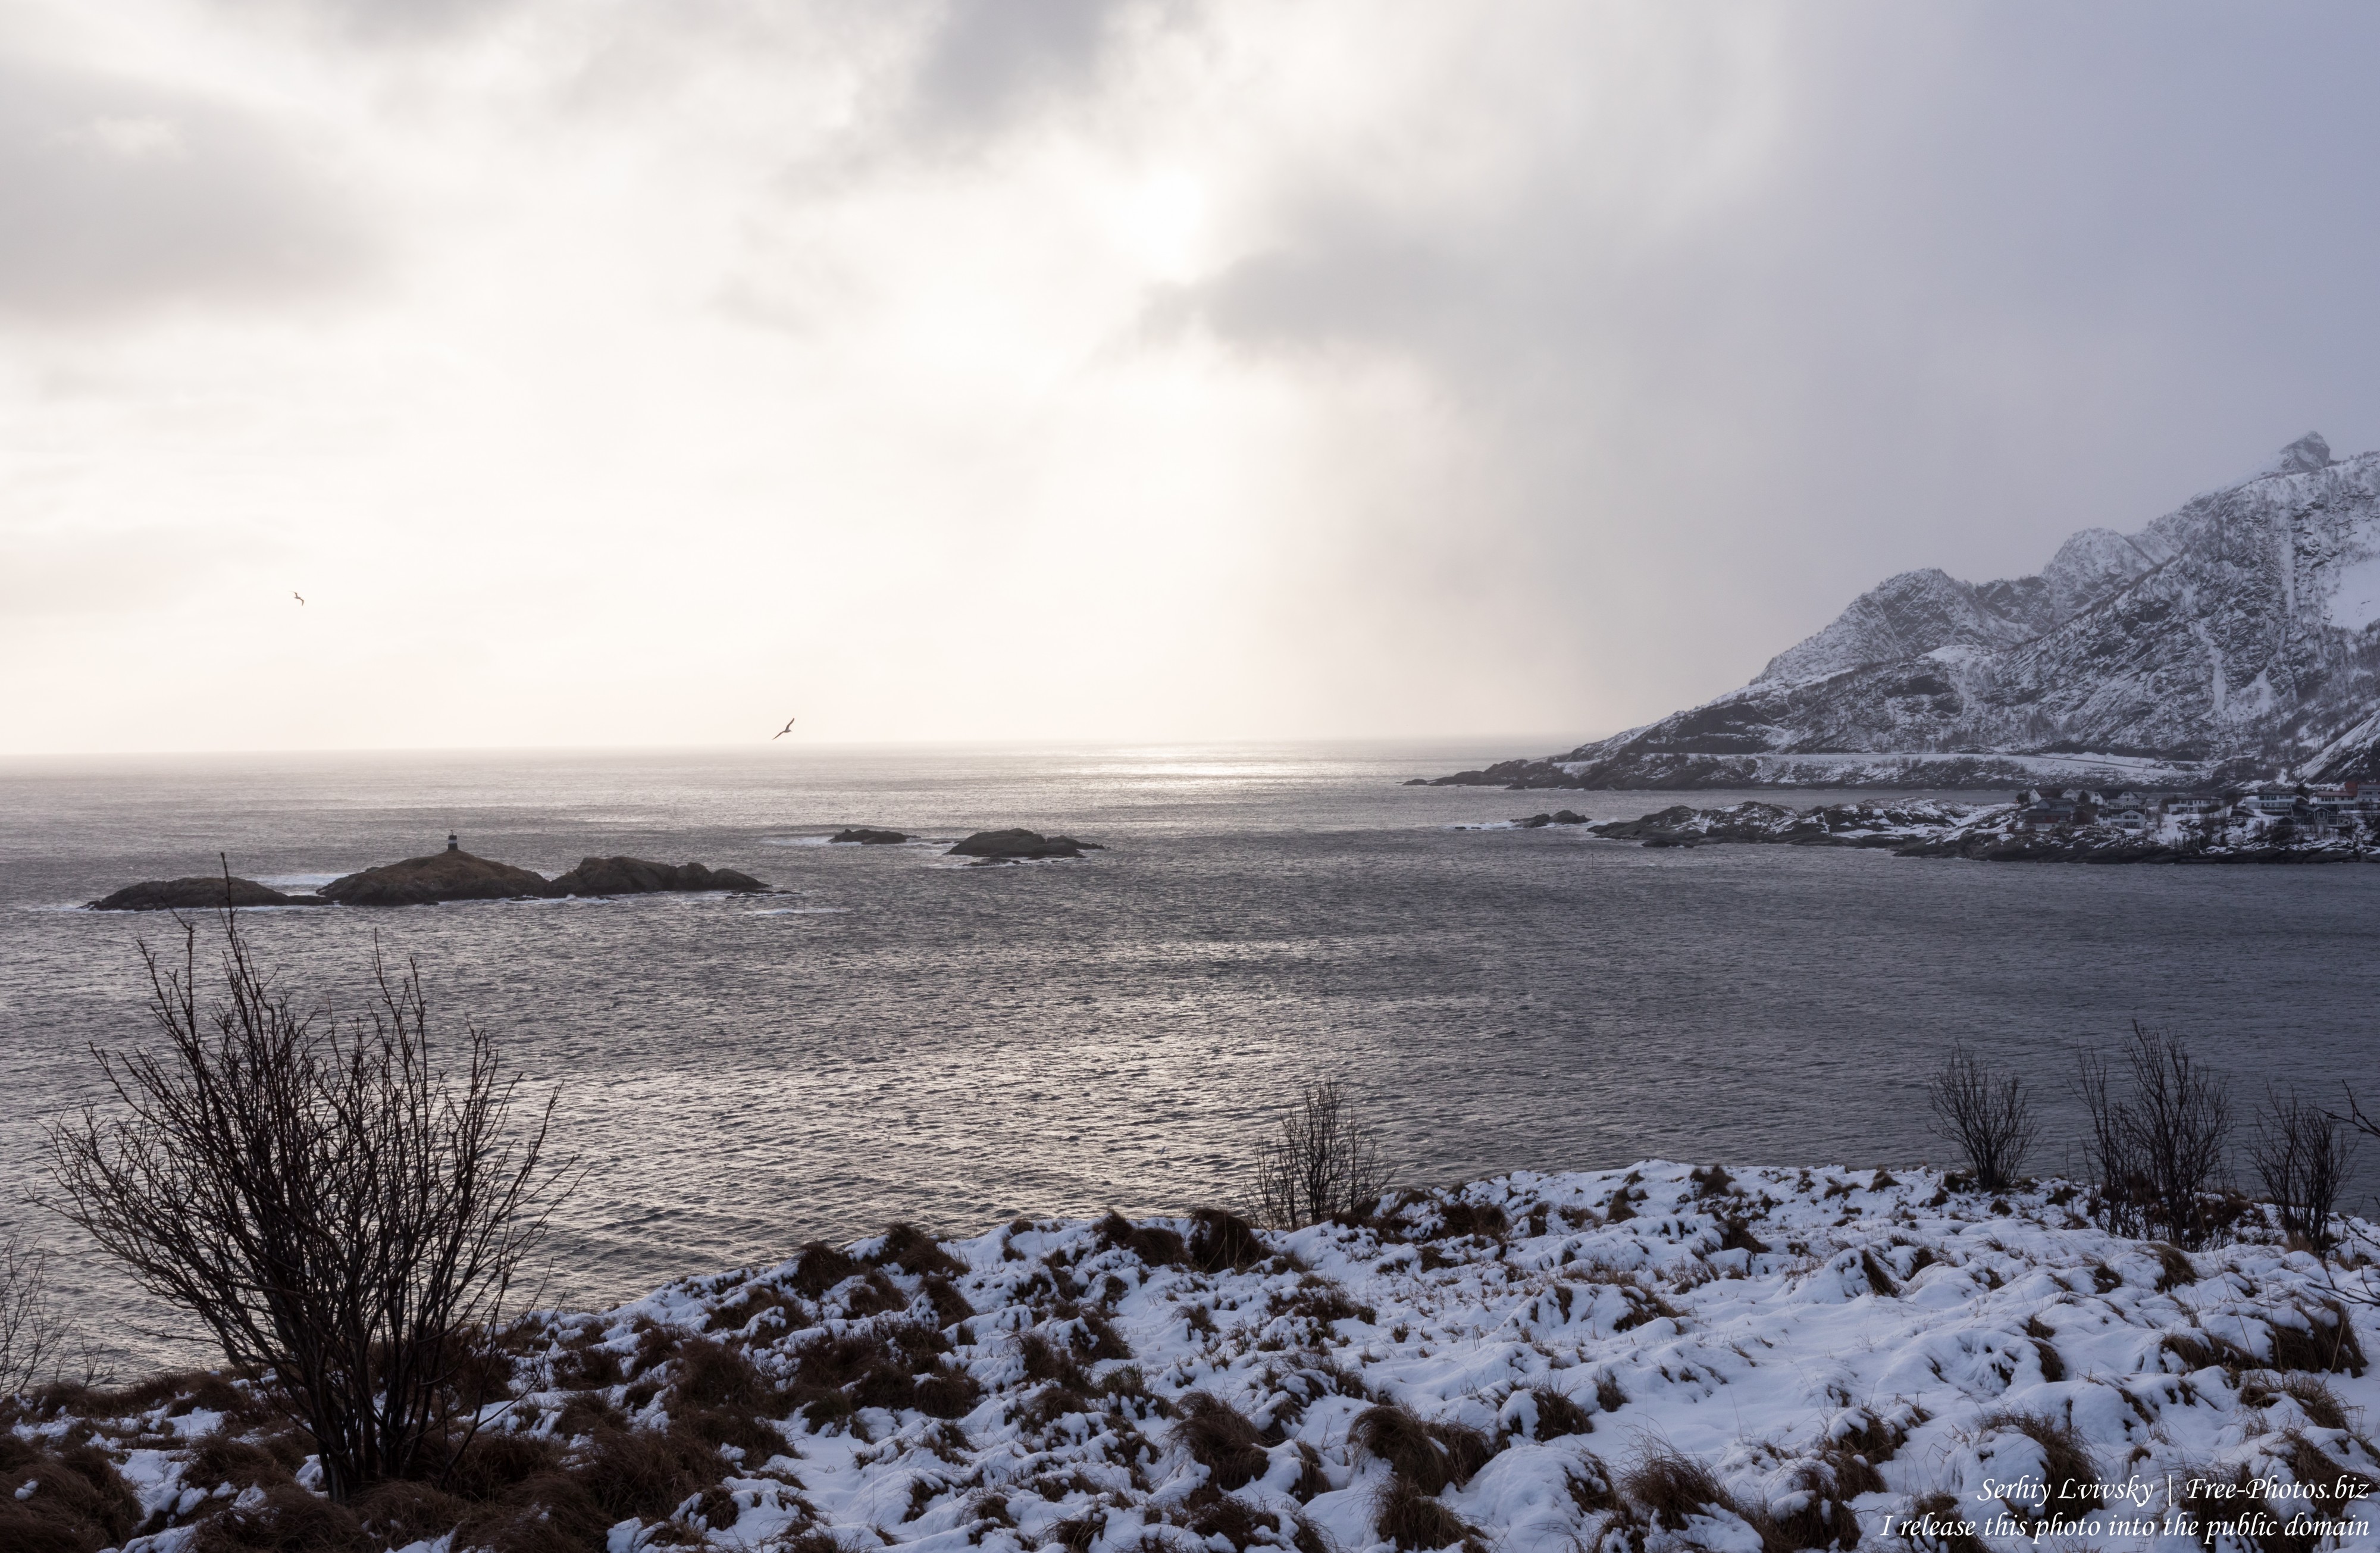 Sakrisoy and surroundings, Norway, in February 2020 by Serhiy Lvivsky, picture 16